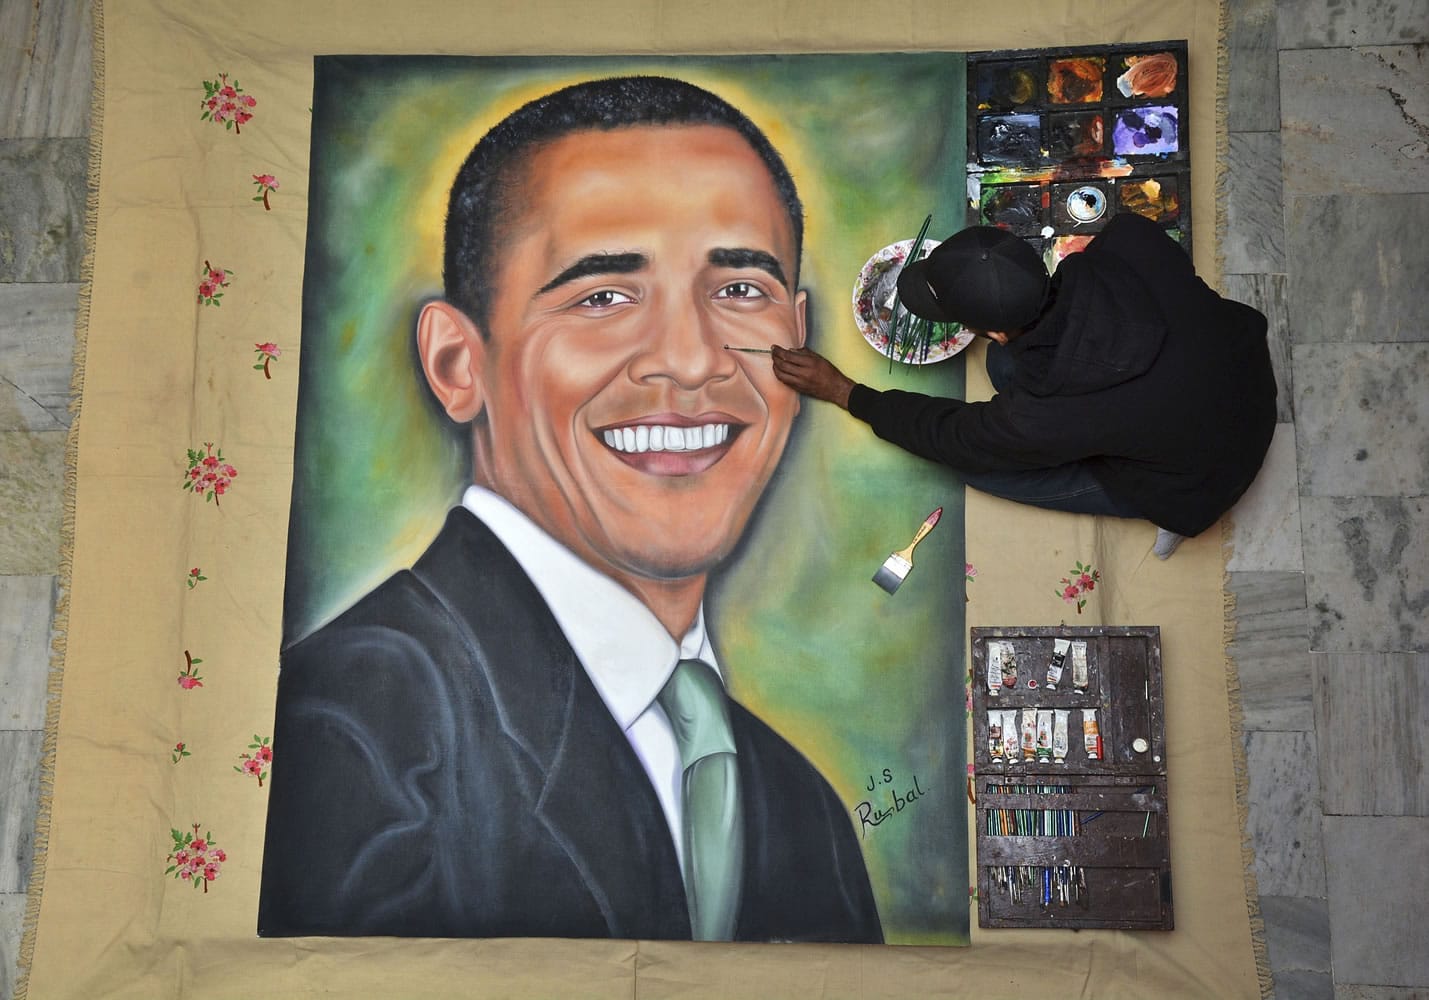 Indian artist Jagjot Singh Rubal puts final touches on a painting of U.S. President Barack Obama on Friday in Amritsar, India. Obama arrives in New Delhi on Sunday and will be the first American president to attend India's annual Republic Day festivities, celebrated annually on Jan.